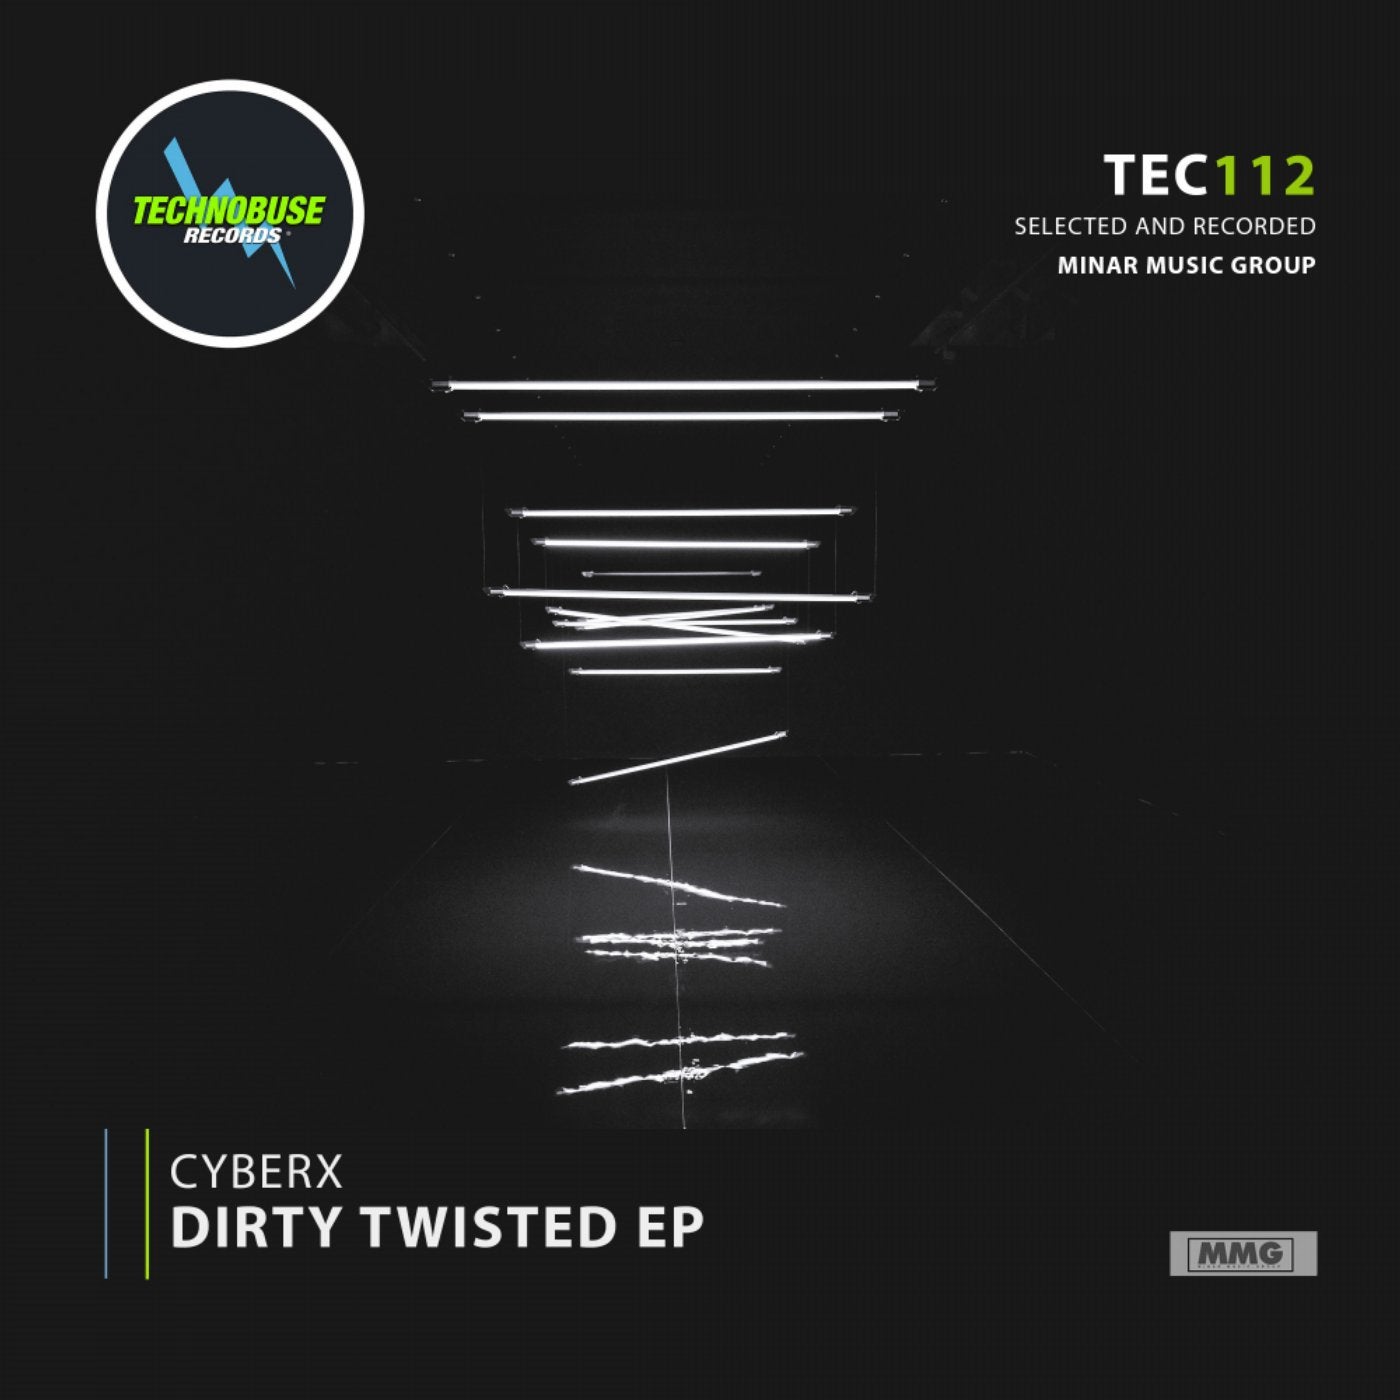 Dirty Twisted EP